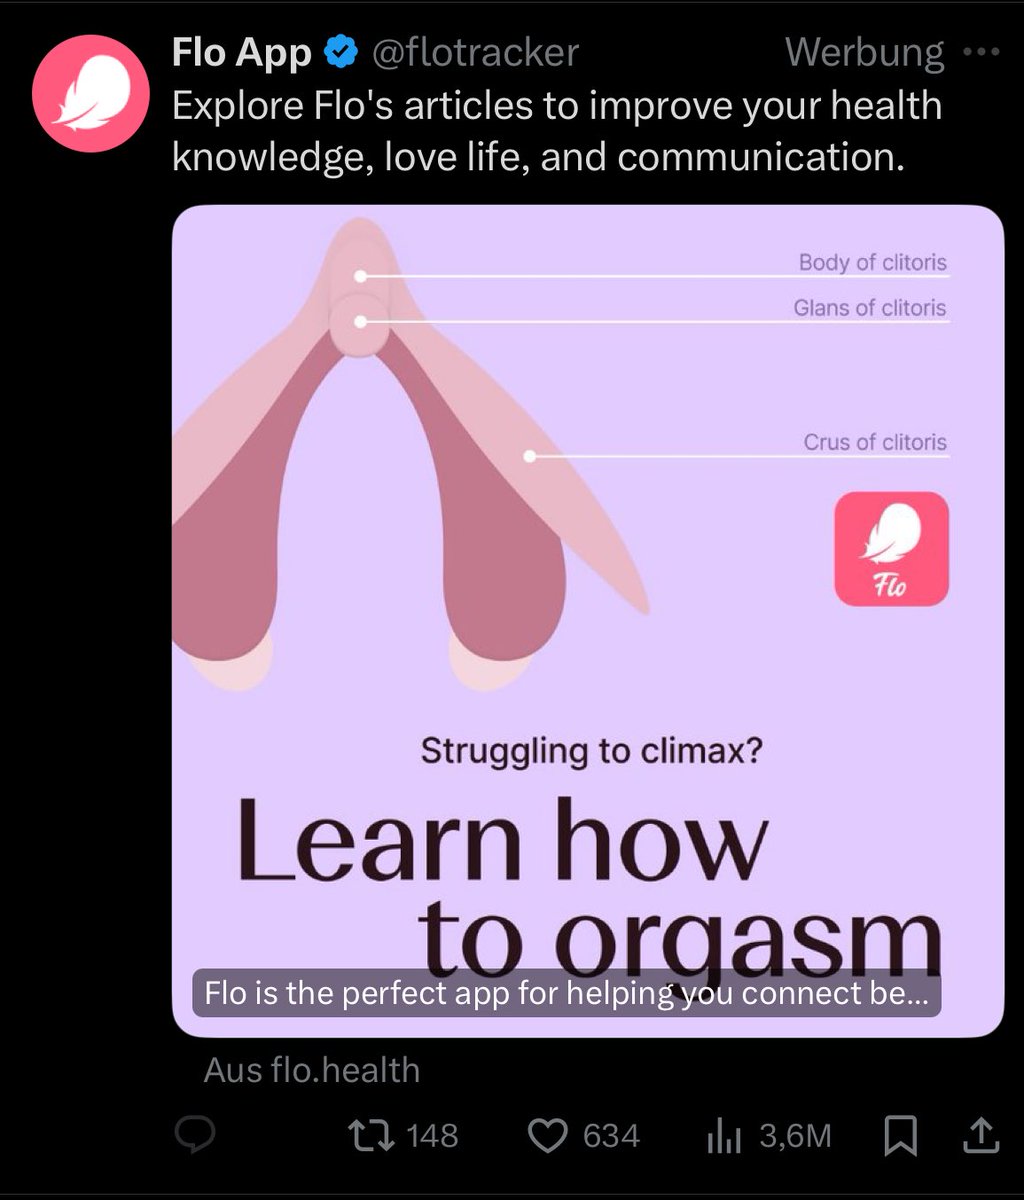 From all kinds of surgery adds on Ins tagram (fly to Turkey for procedures- from beauty to dental), fucking sportsbra ads on here. Now this? Wtf?